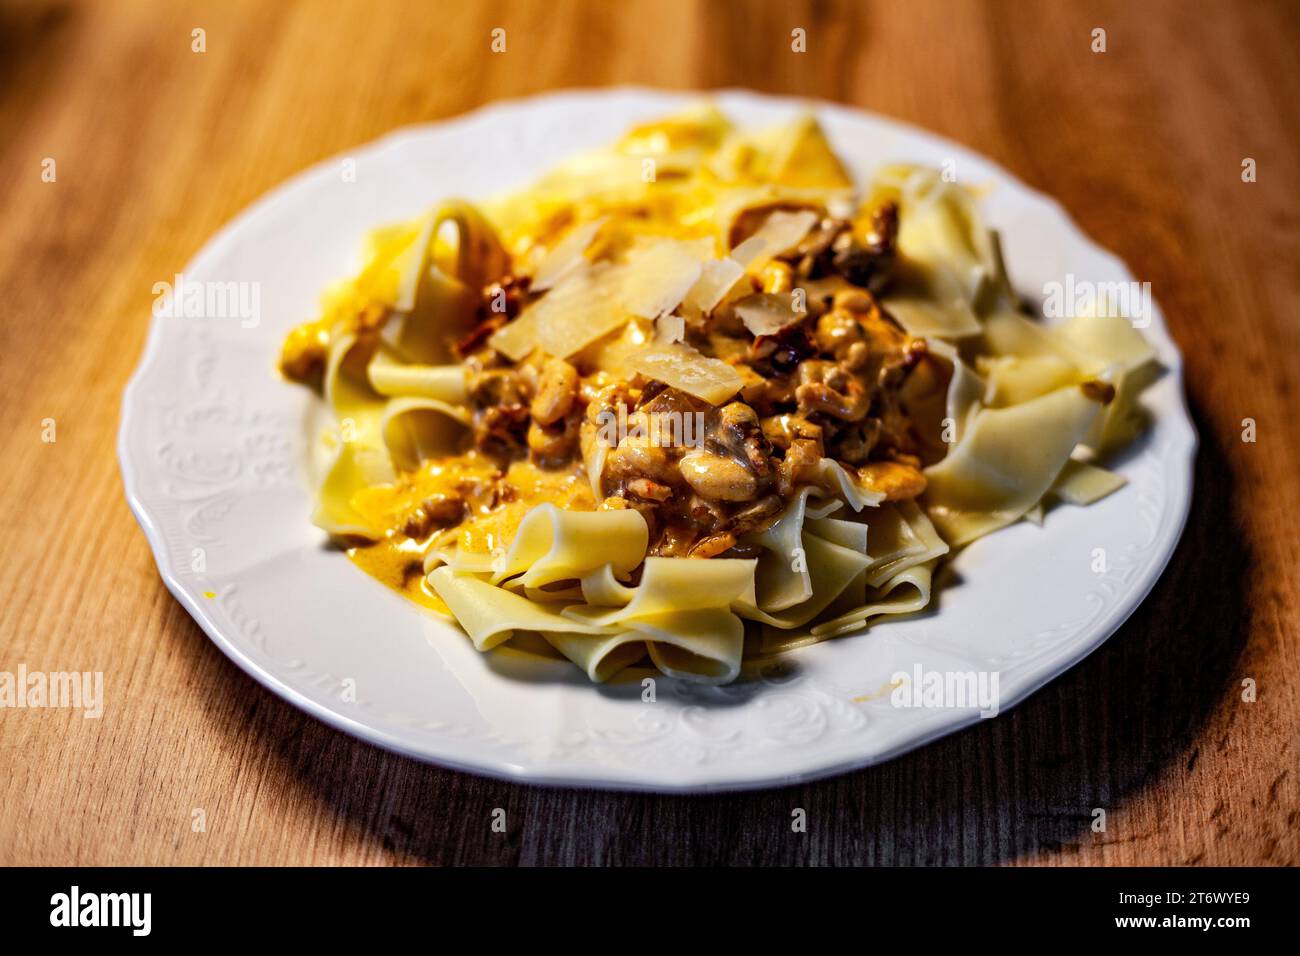 Italian food pasta with shrimp, cream, and parmesan in yellow color on white plate with blurred background on brown table with wood pattern and texture Stock Photo